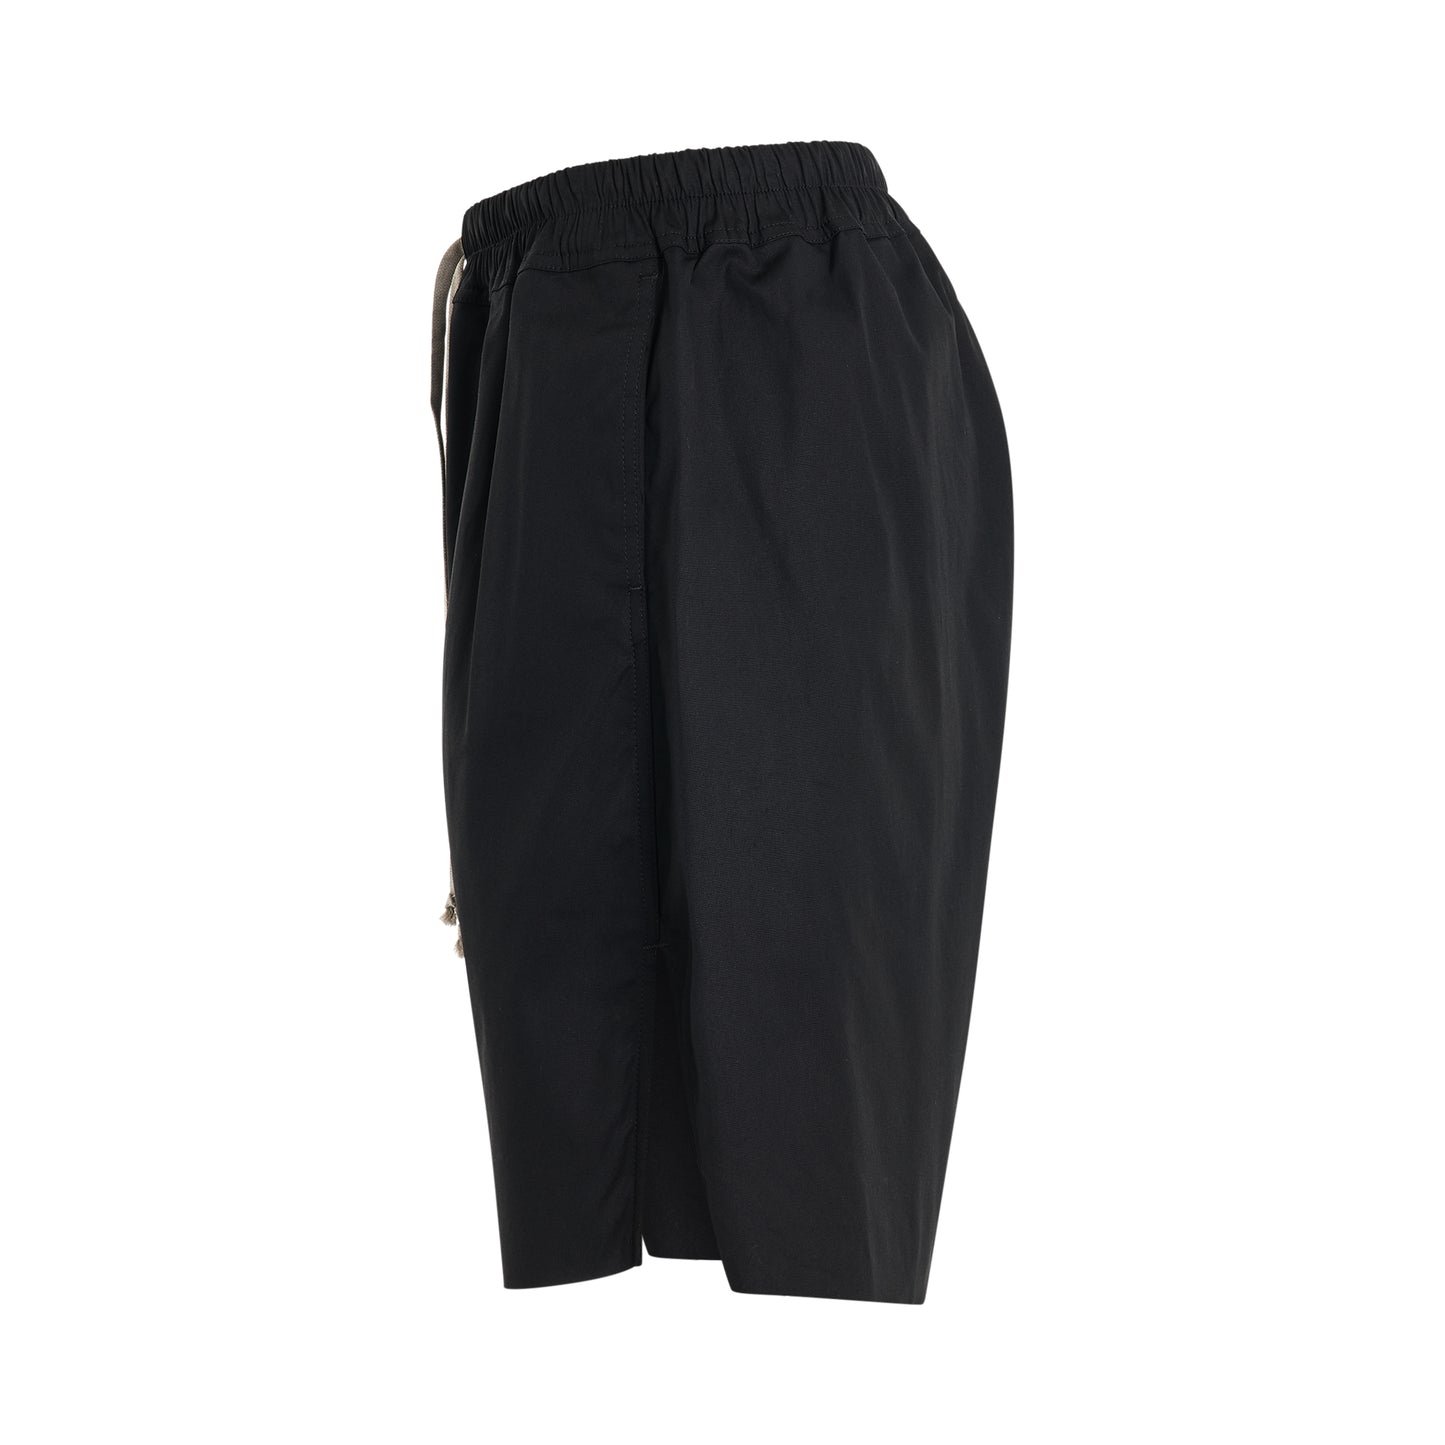 Long Boxers Shorts in Black